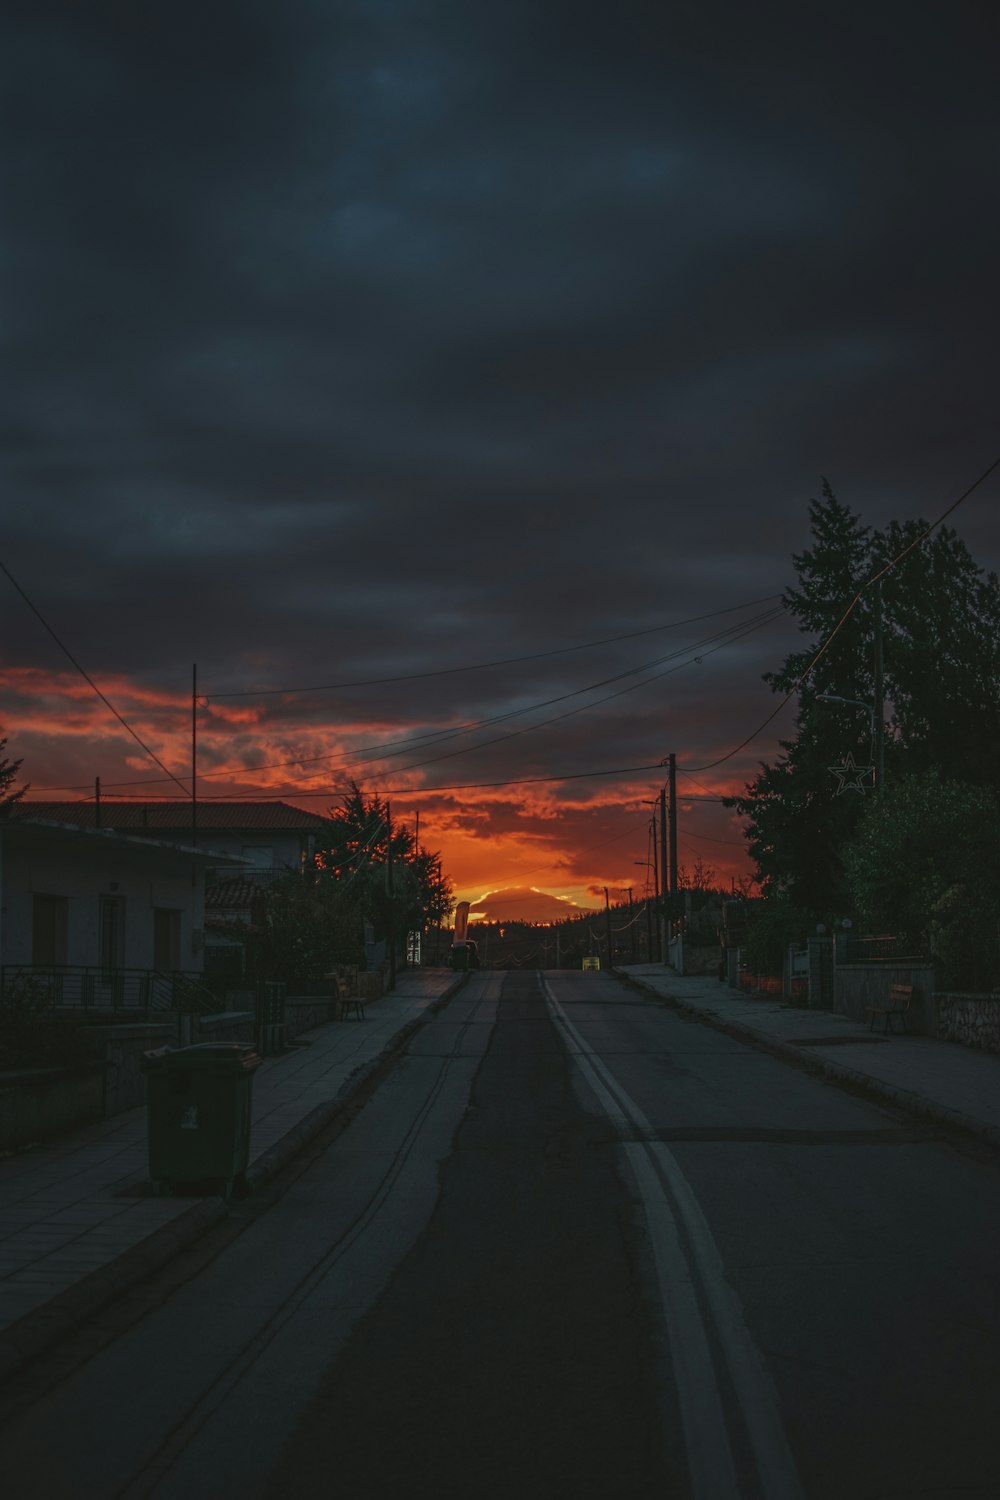 the sun is setting over a city street